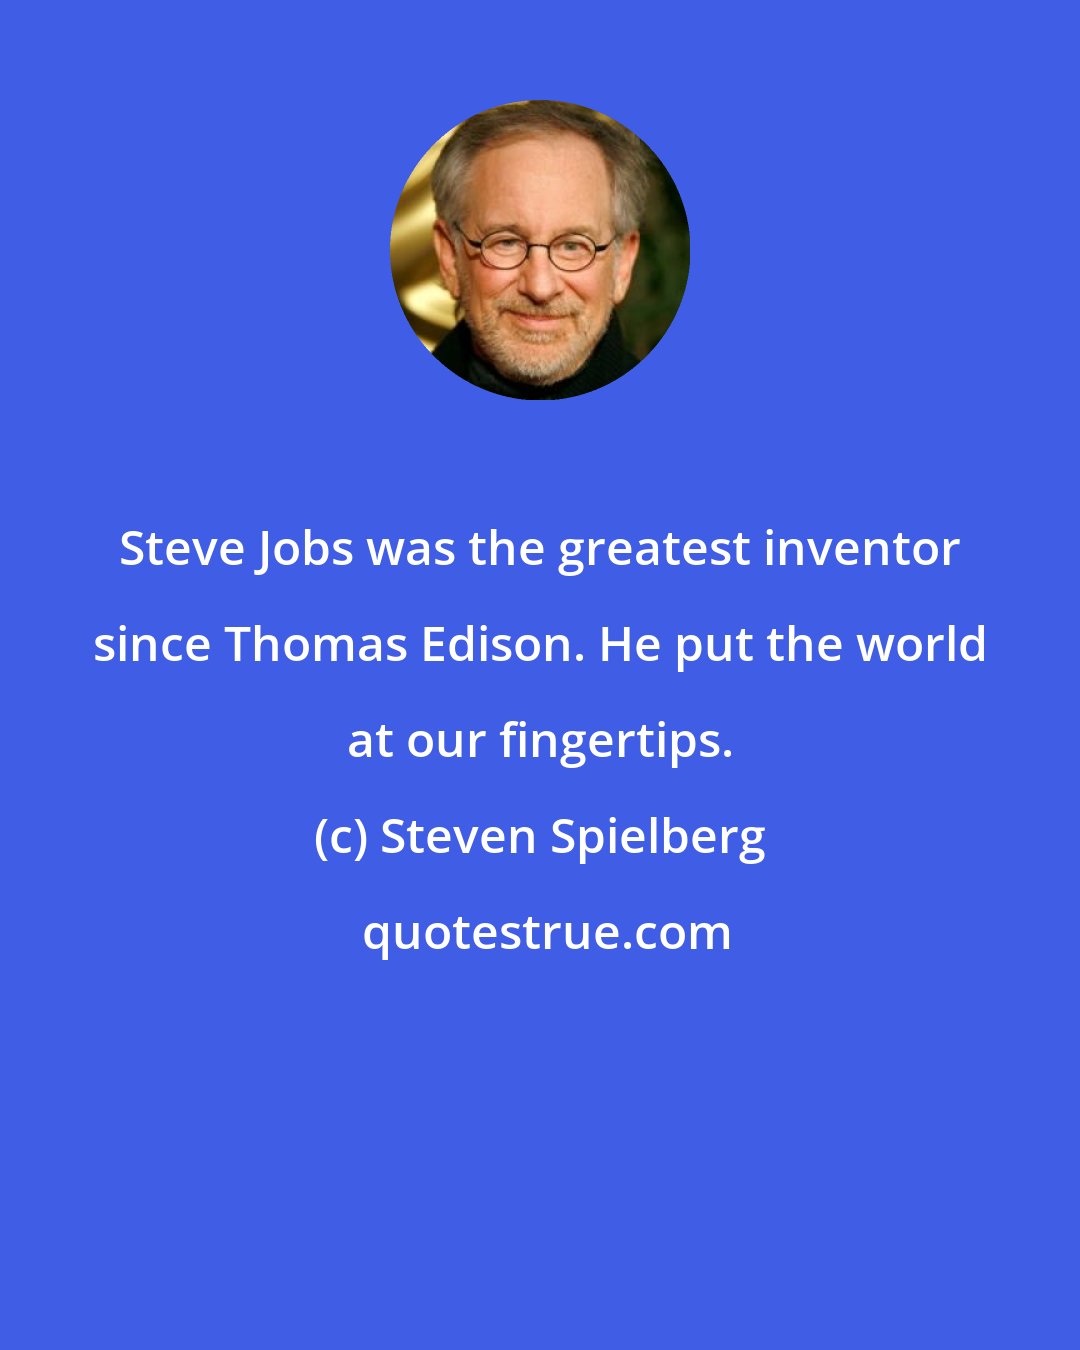 Steven Spielberg: Steve Jobs was the greatest inventor since Thomas Edison. He put the world at our fingertips.